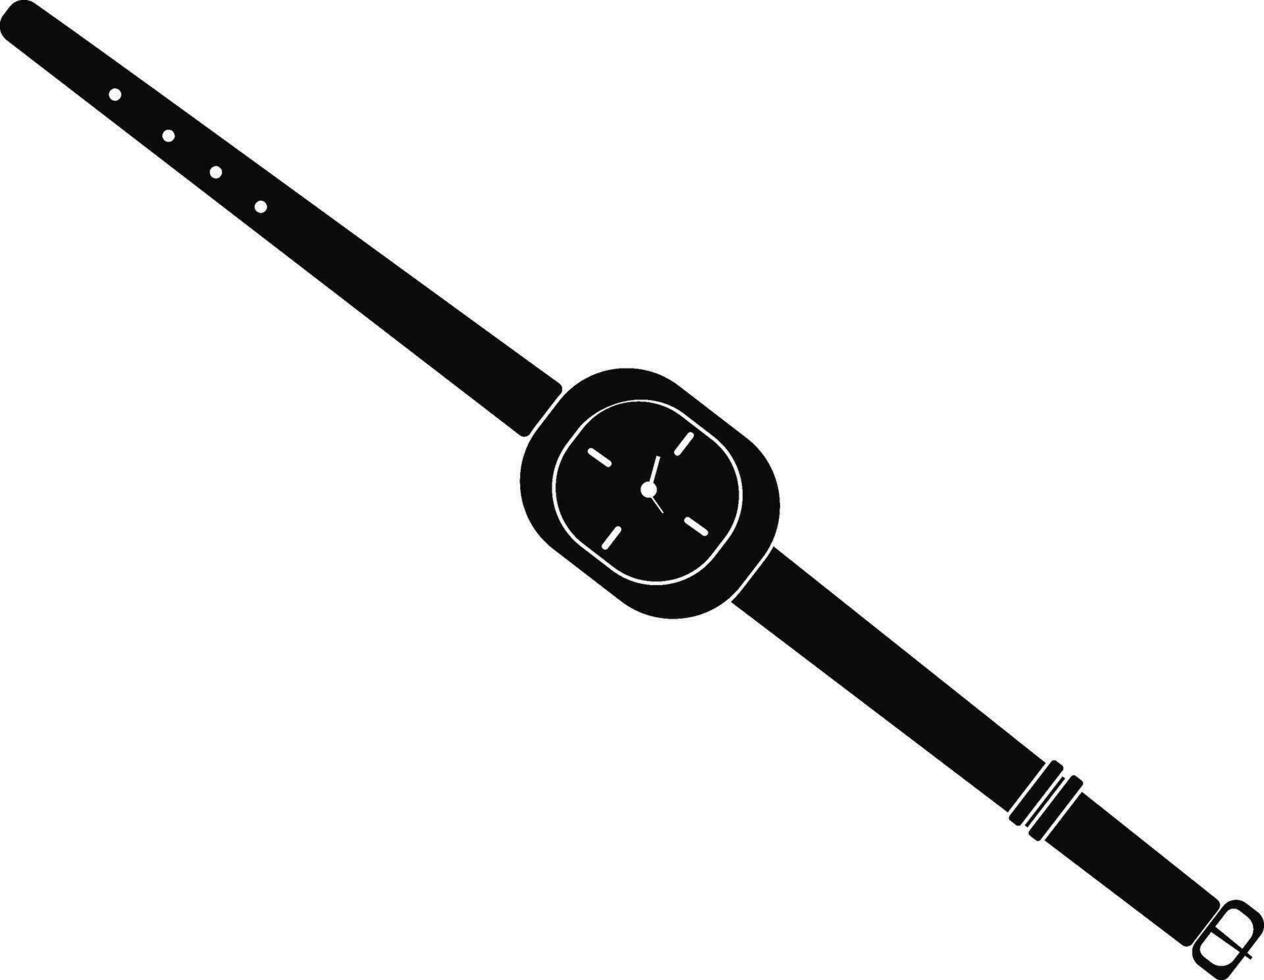 Wrist watch icon for wearing concept in black style. vector